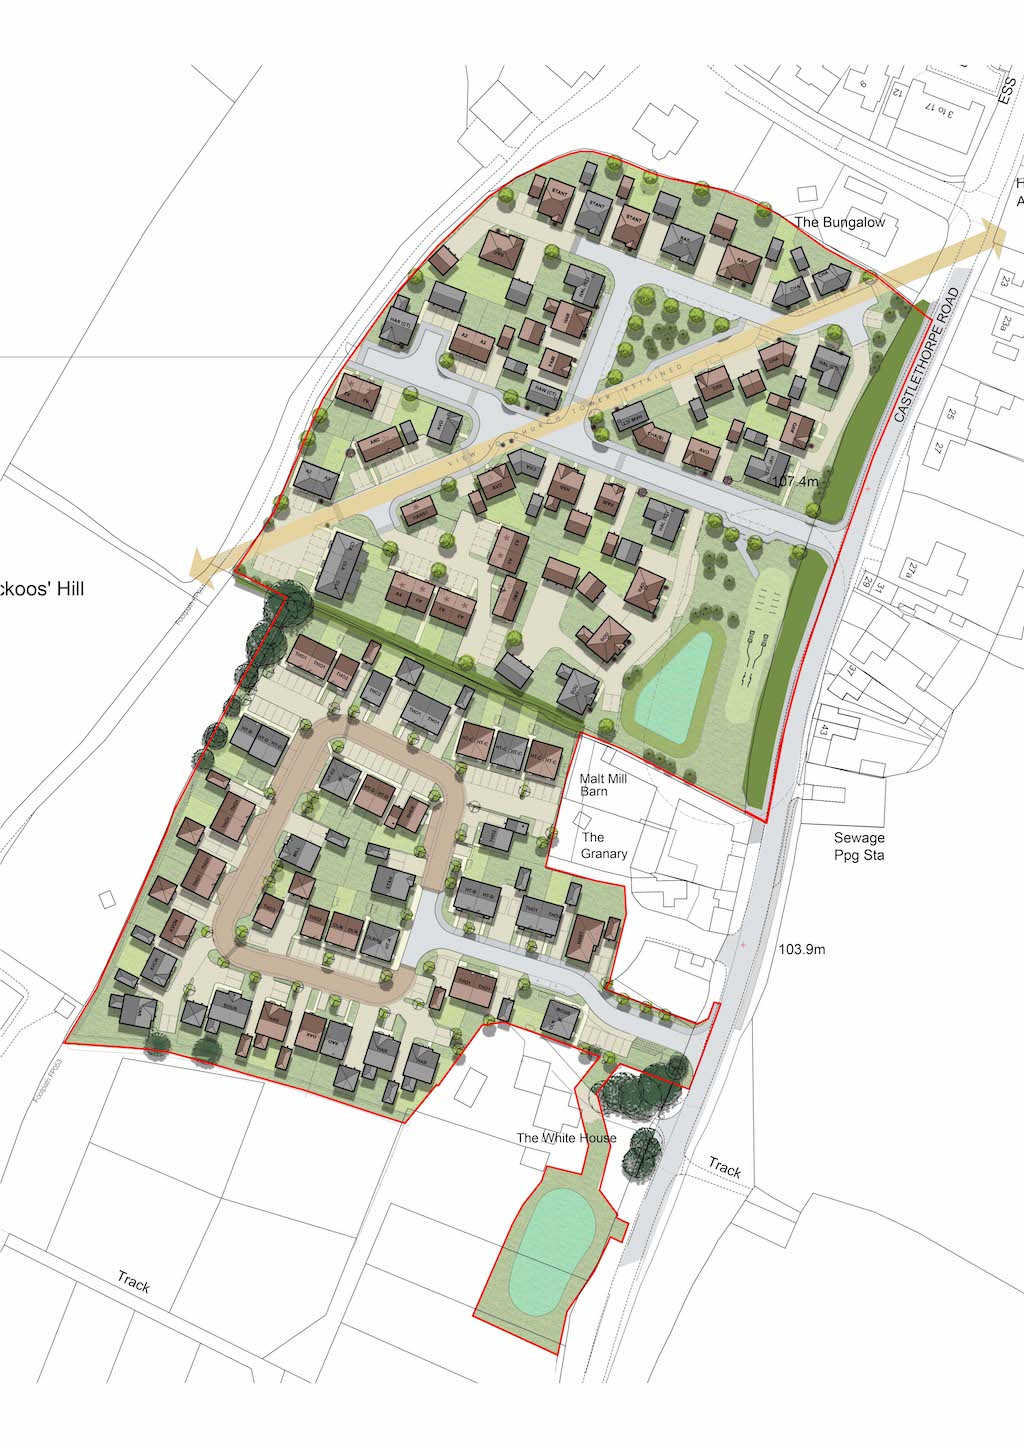 Hayfield acquires a prime site in Buckinghamshire to deliver a £36m ‘green’ development